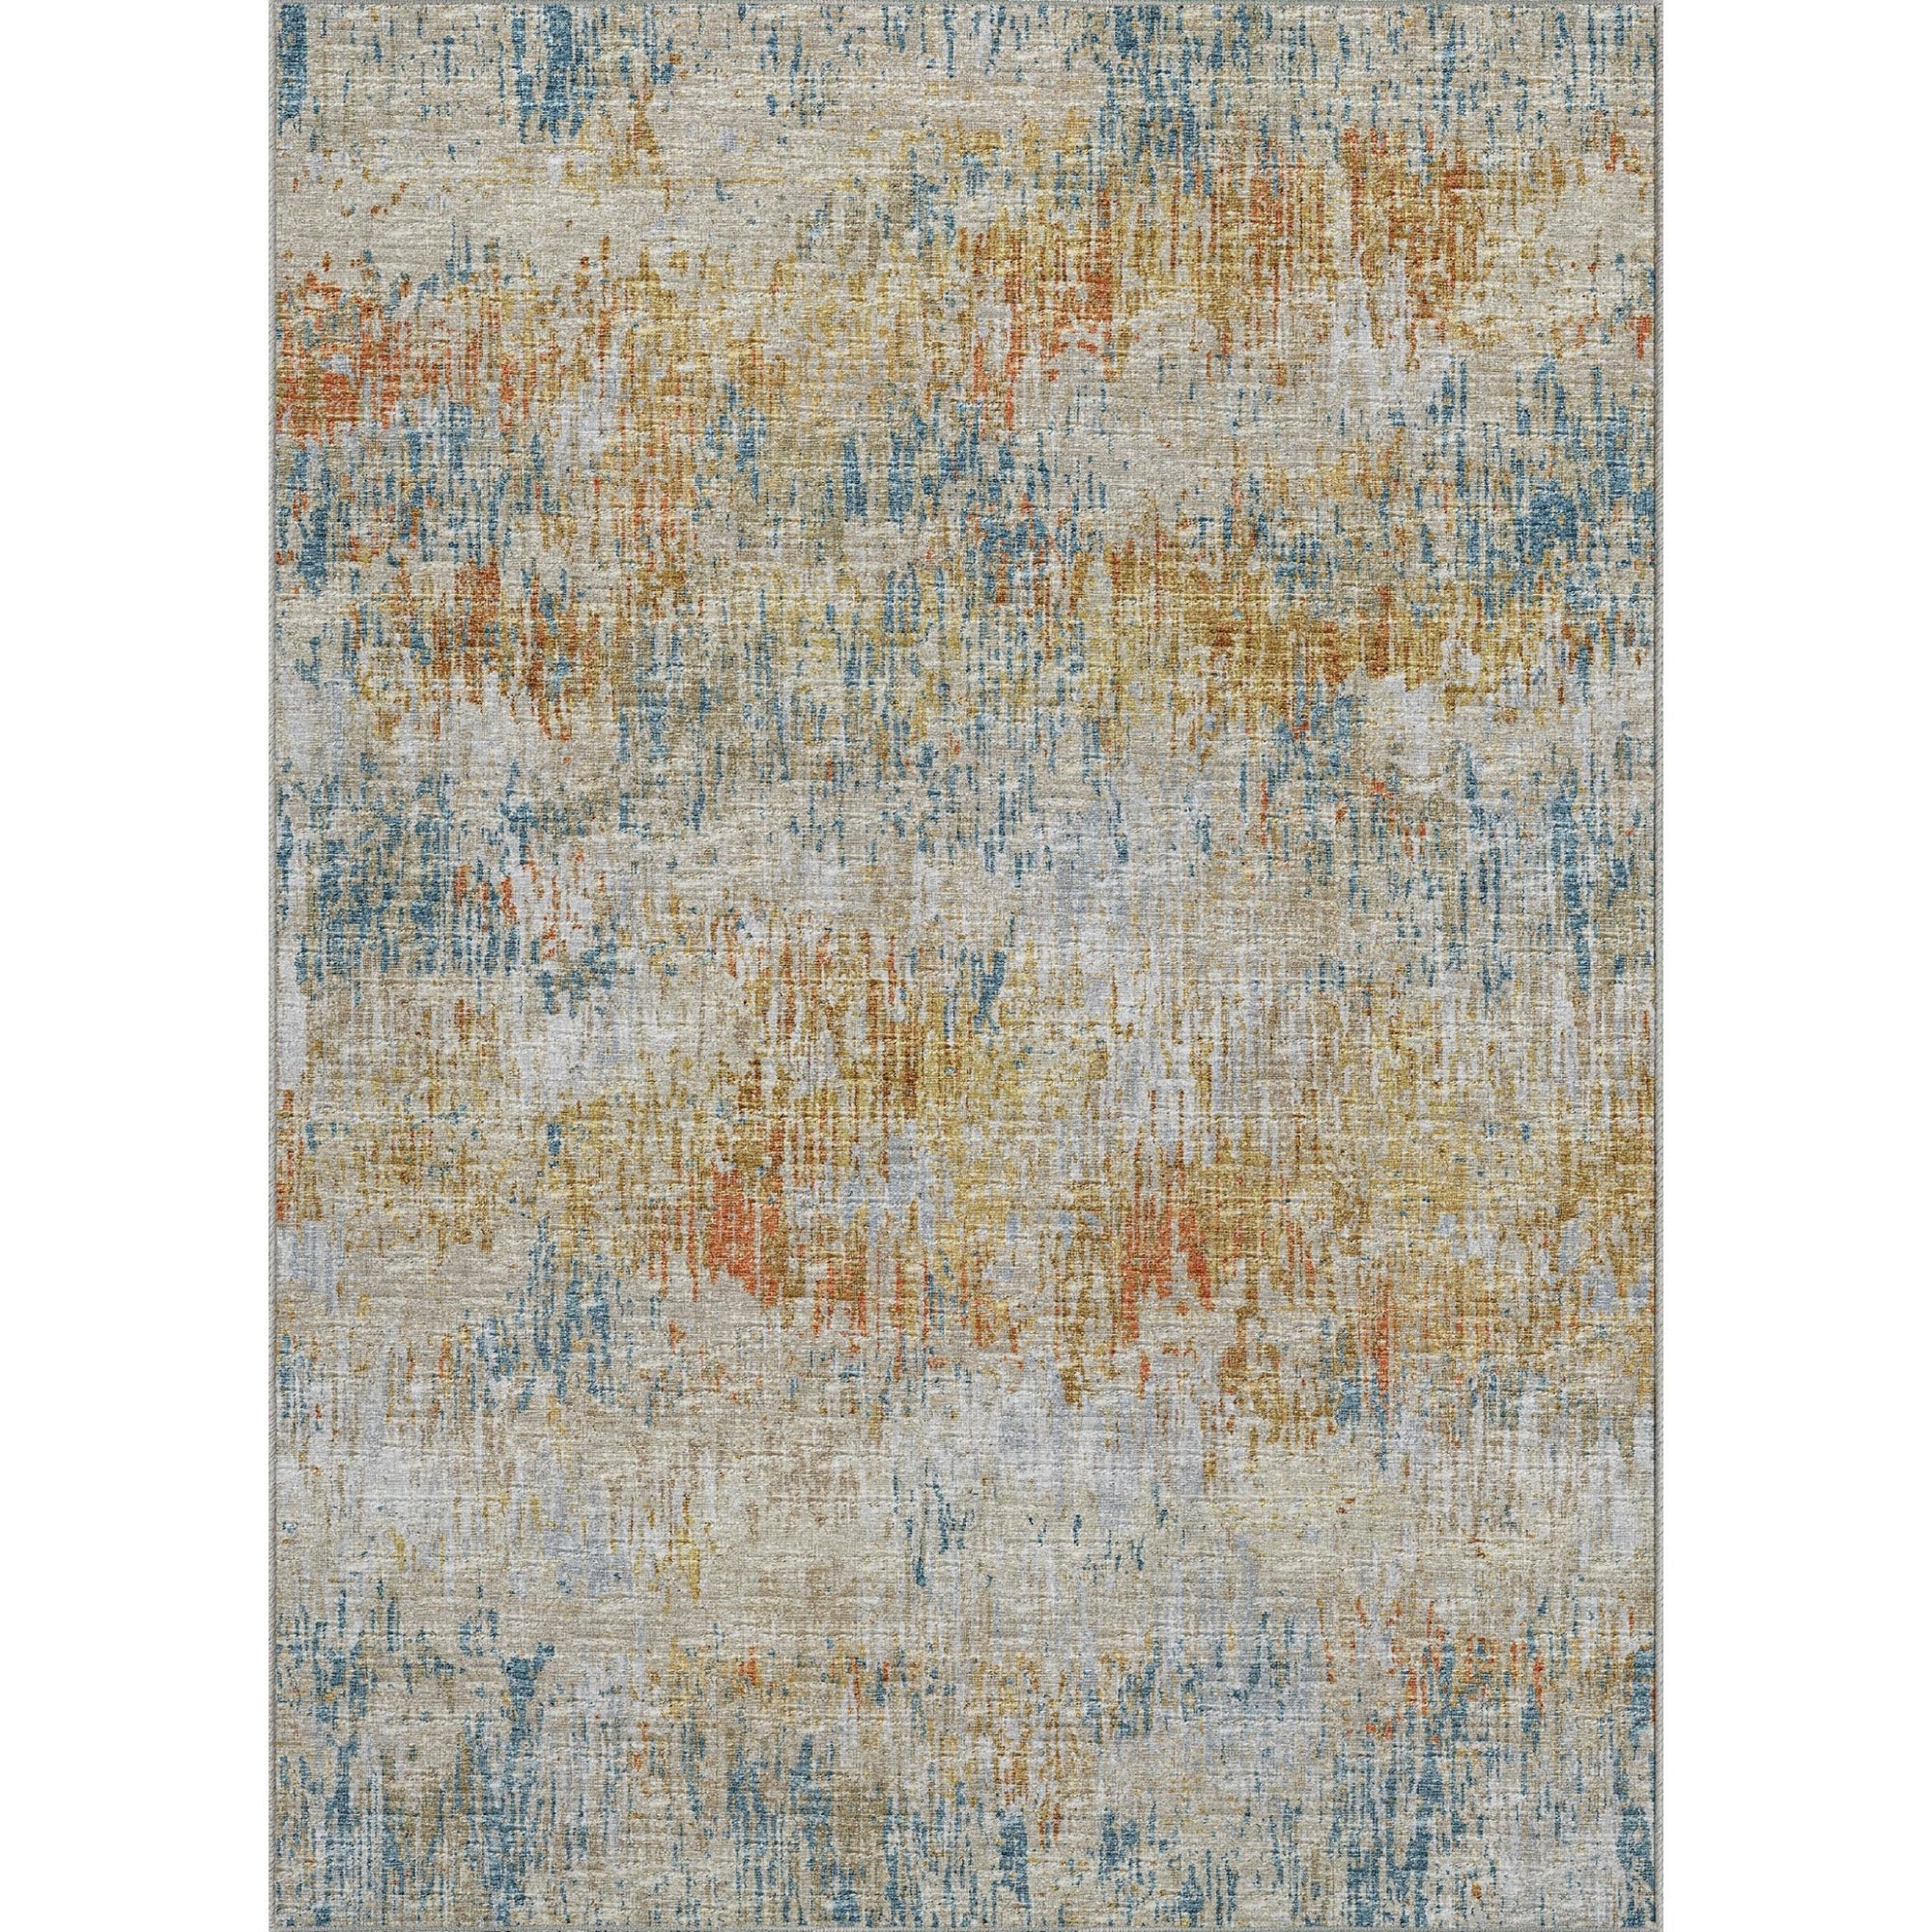 Camberly CM1 Sunset Rug - Rug & Home